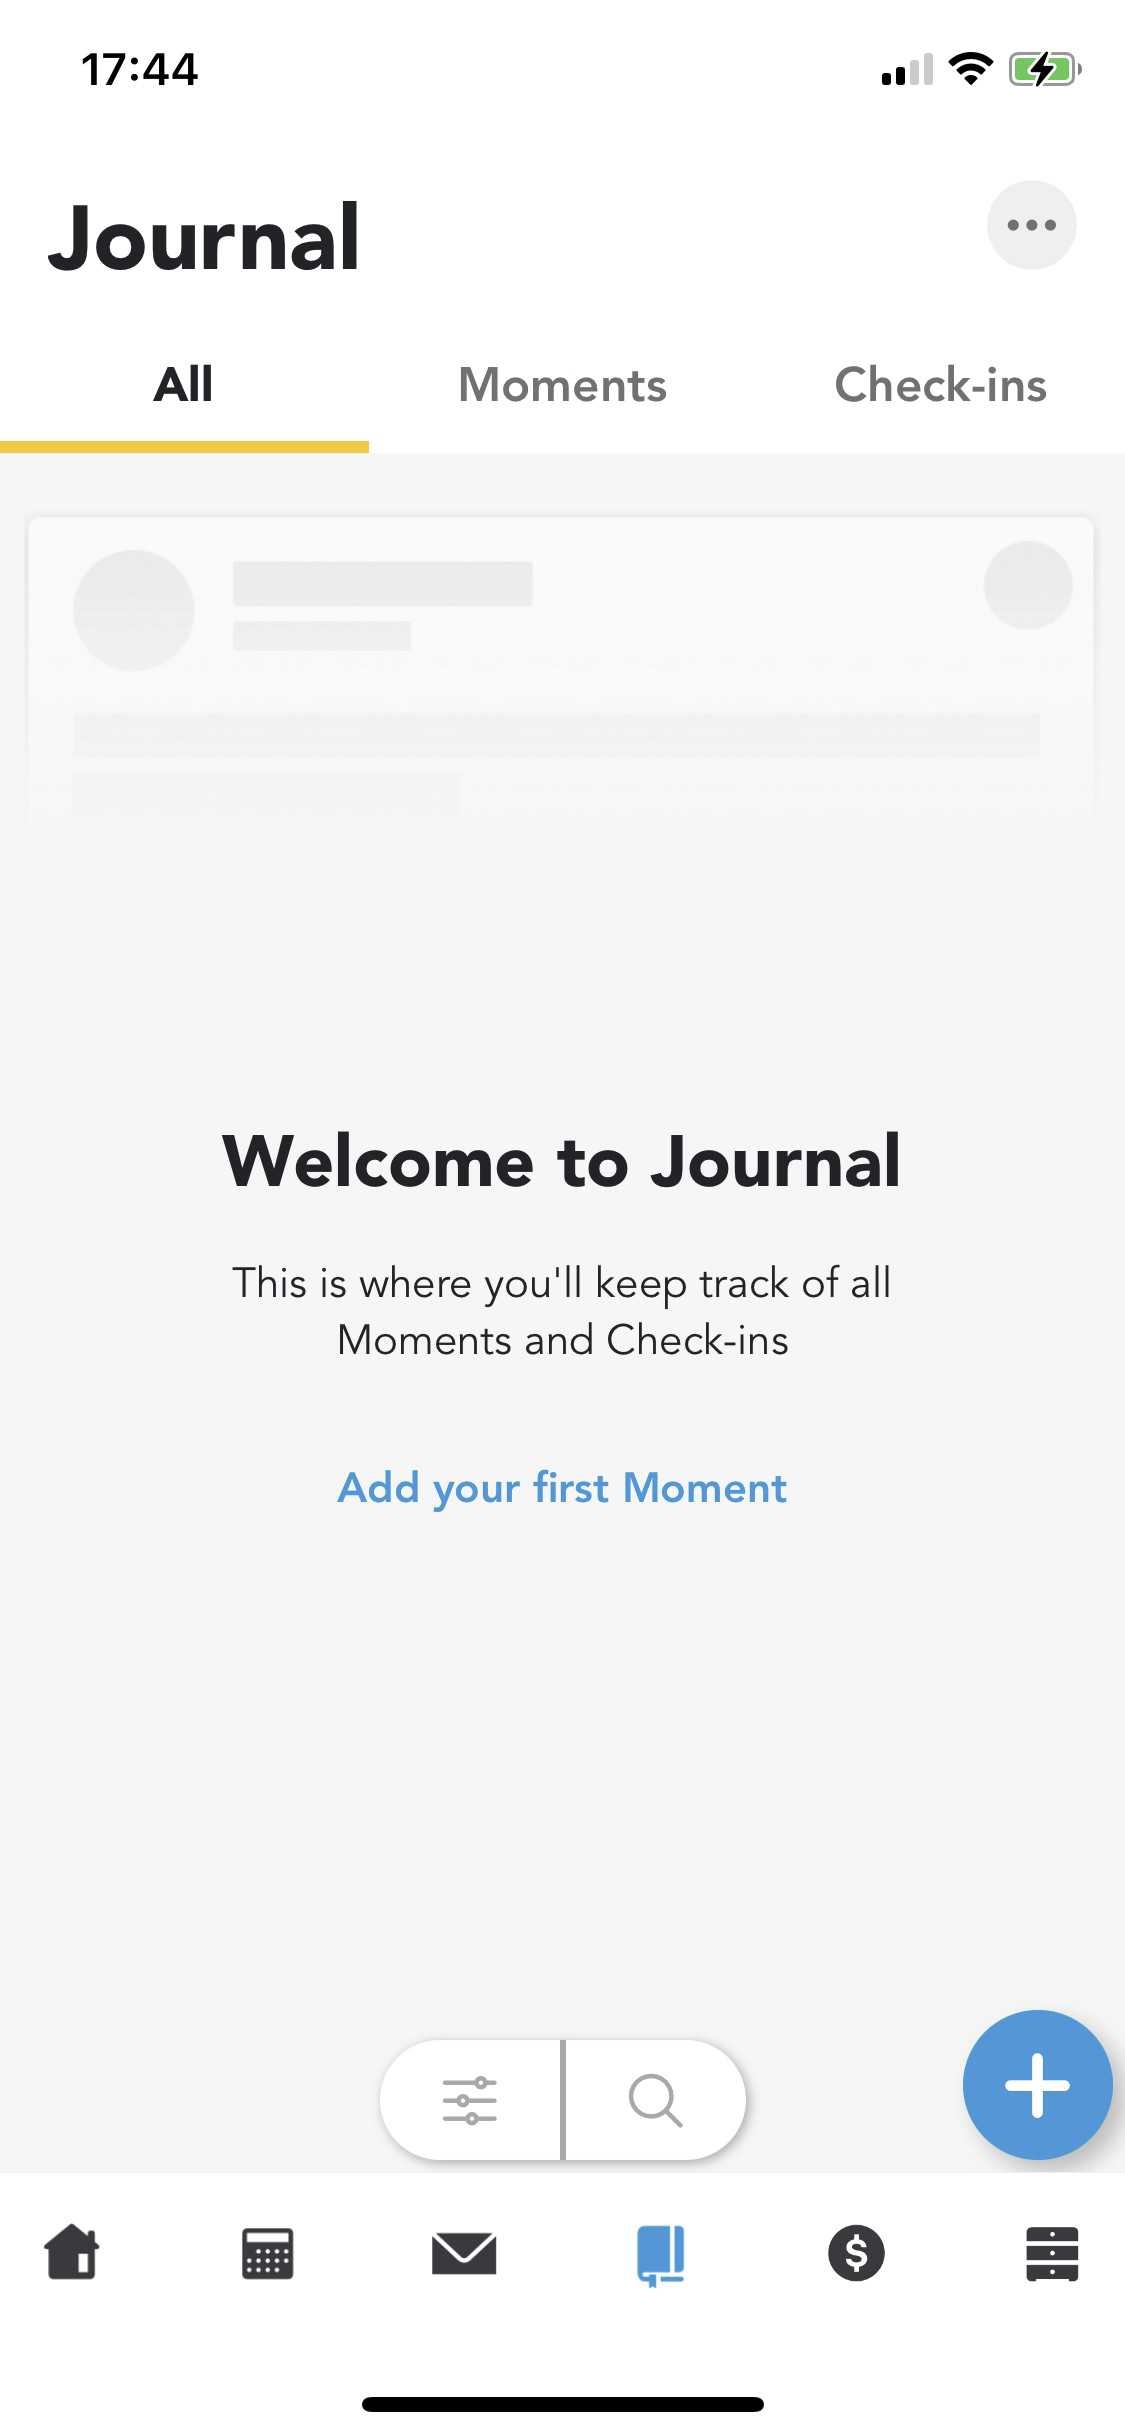 Screenshot of the Journal feature that includes two categories, Moments and Check-ins.